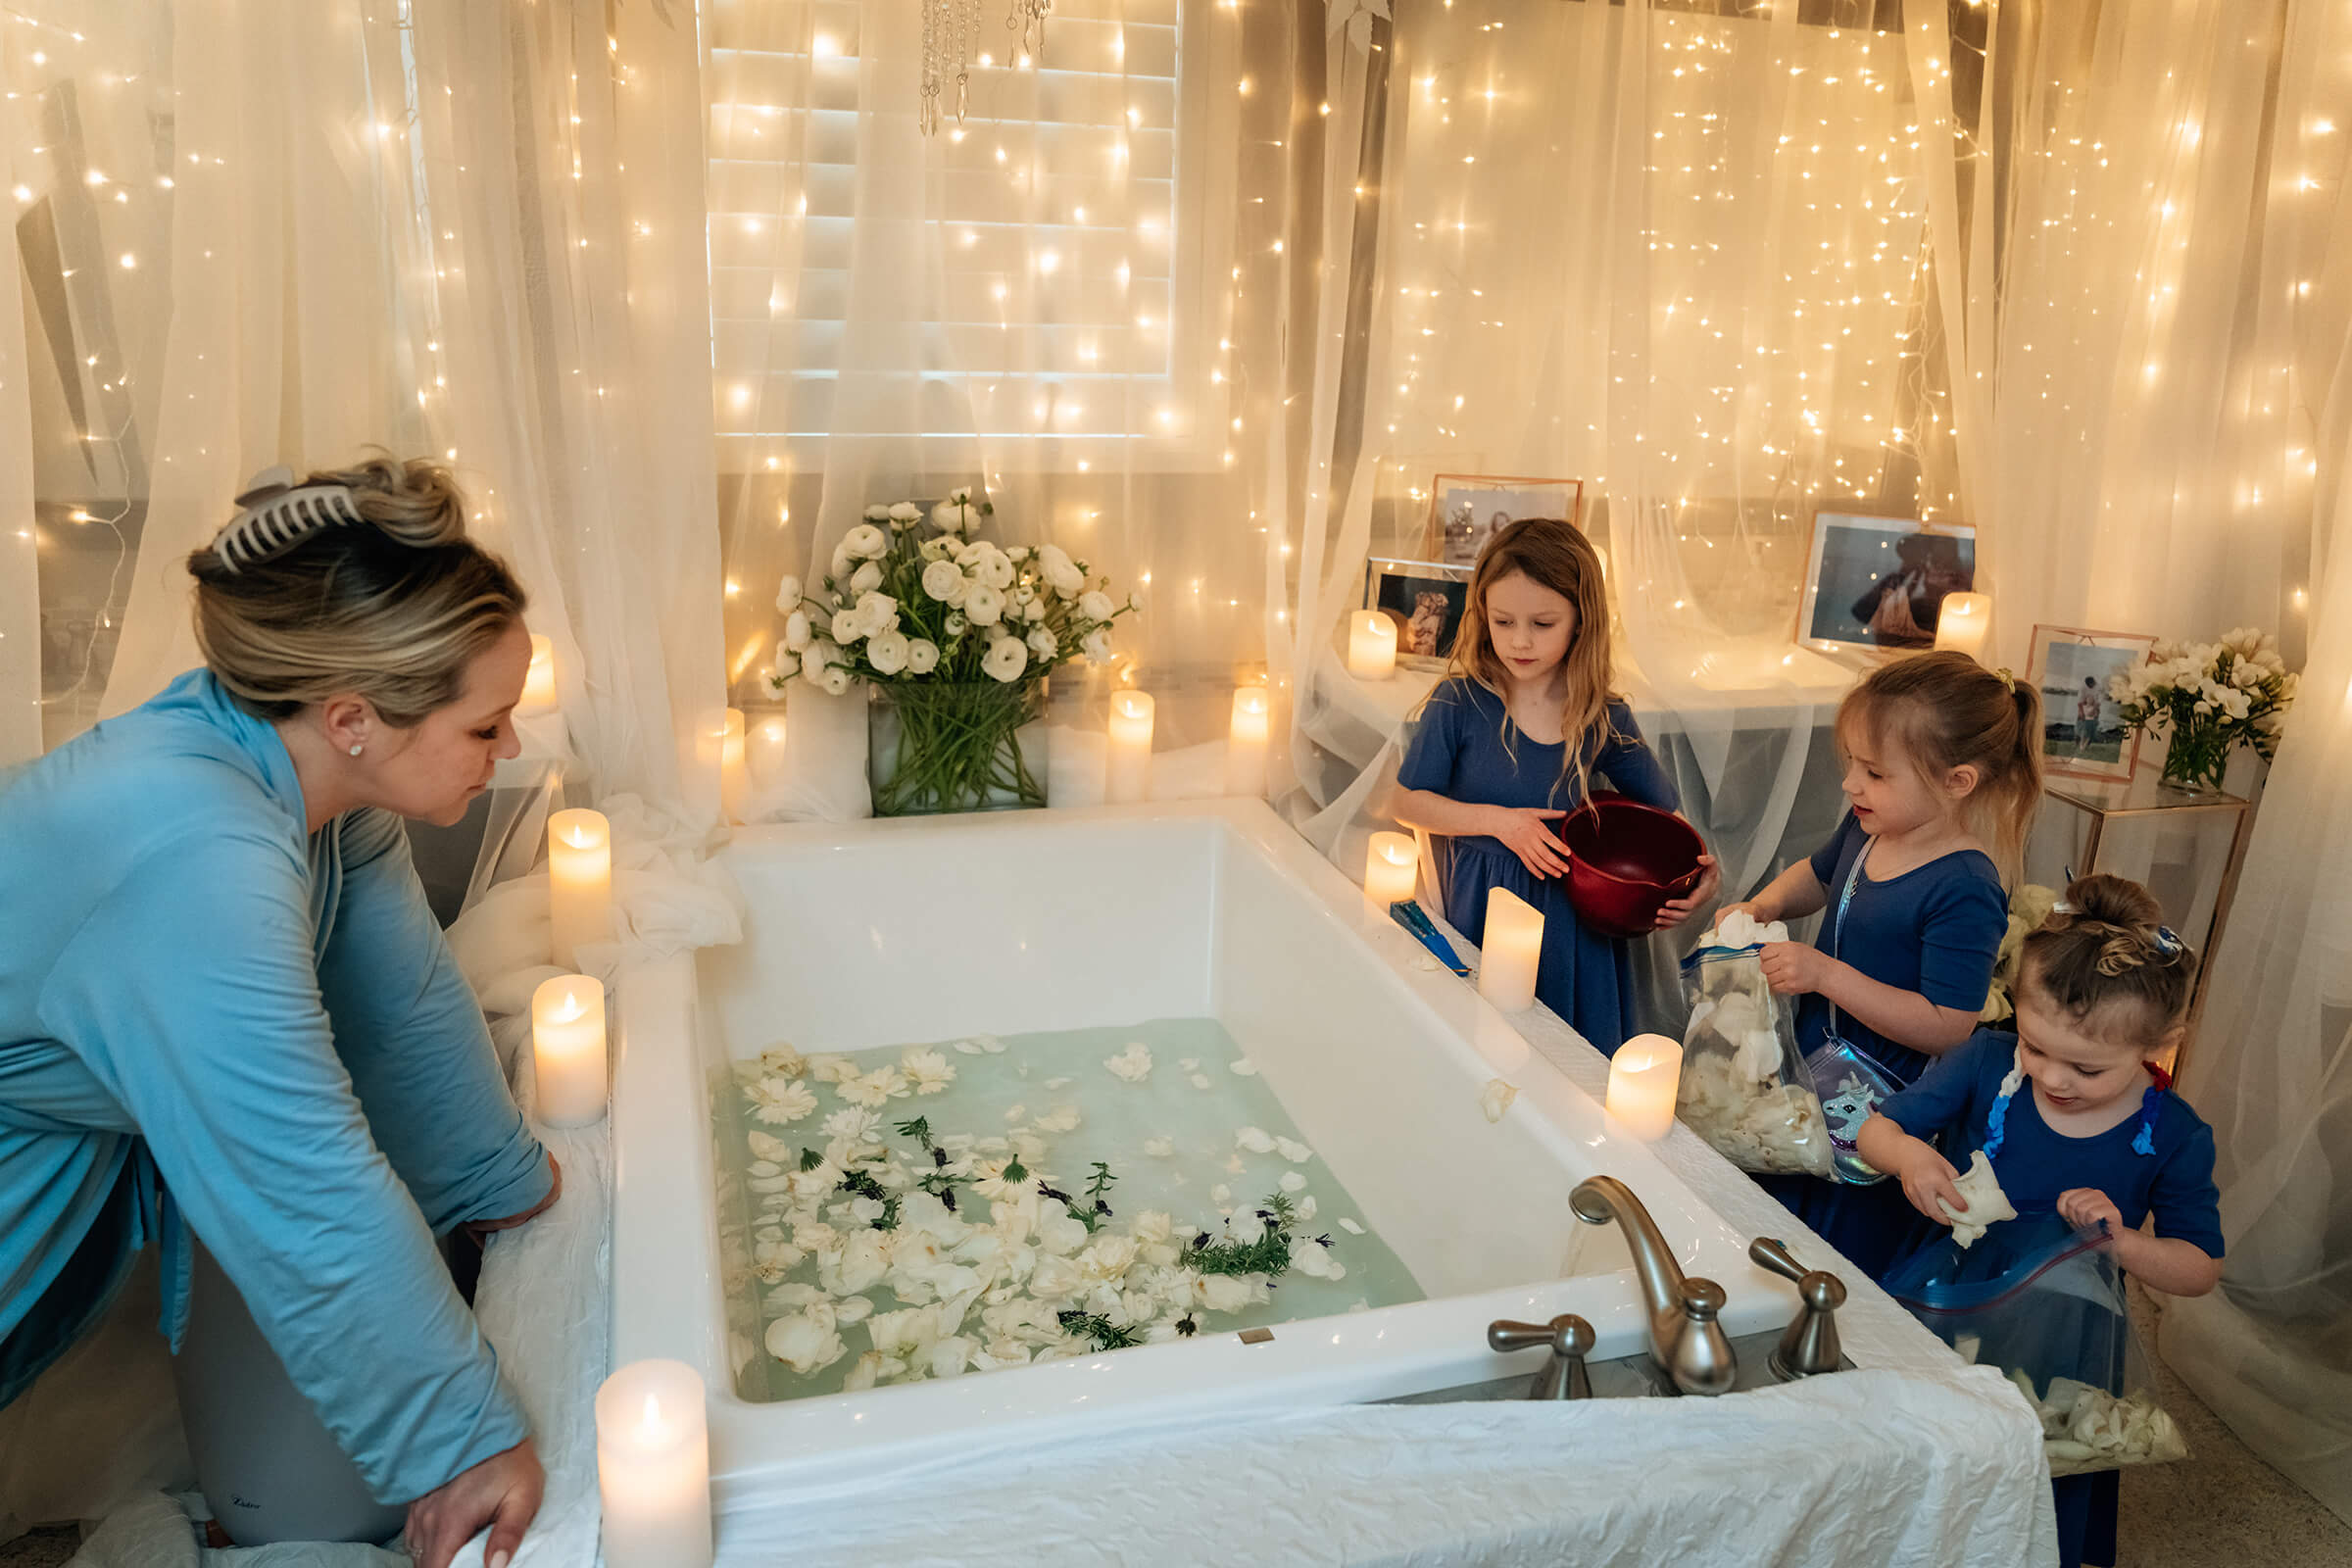 daughters filling tub with flower petals as their mother labors at home